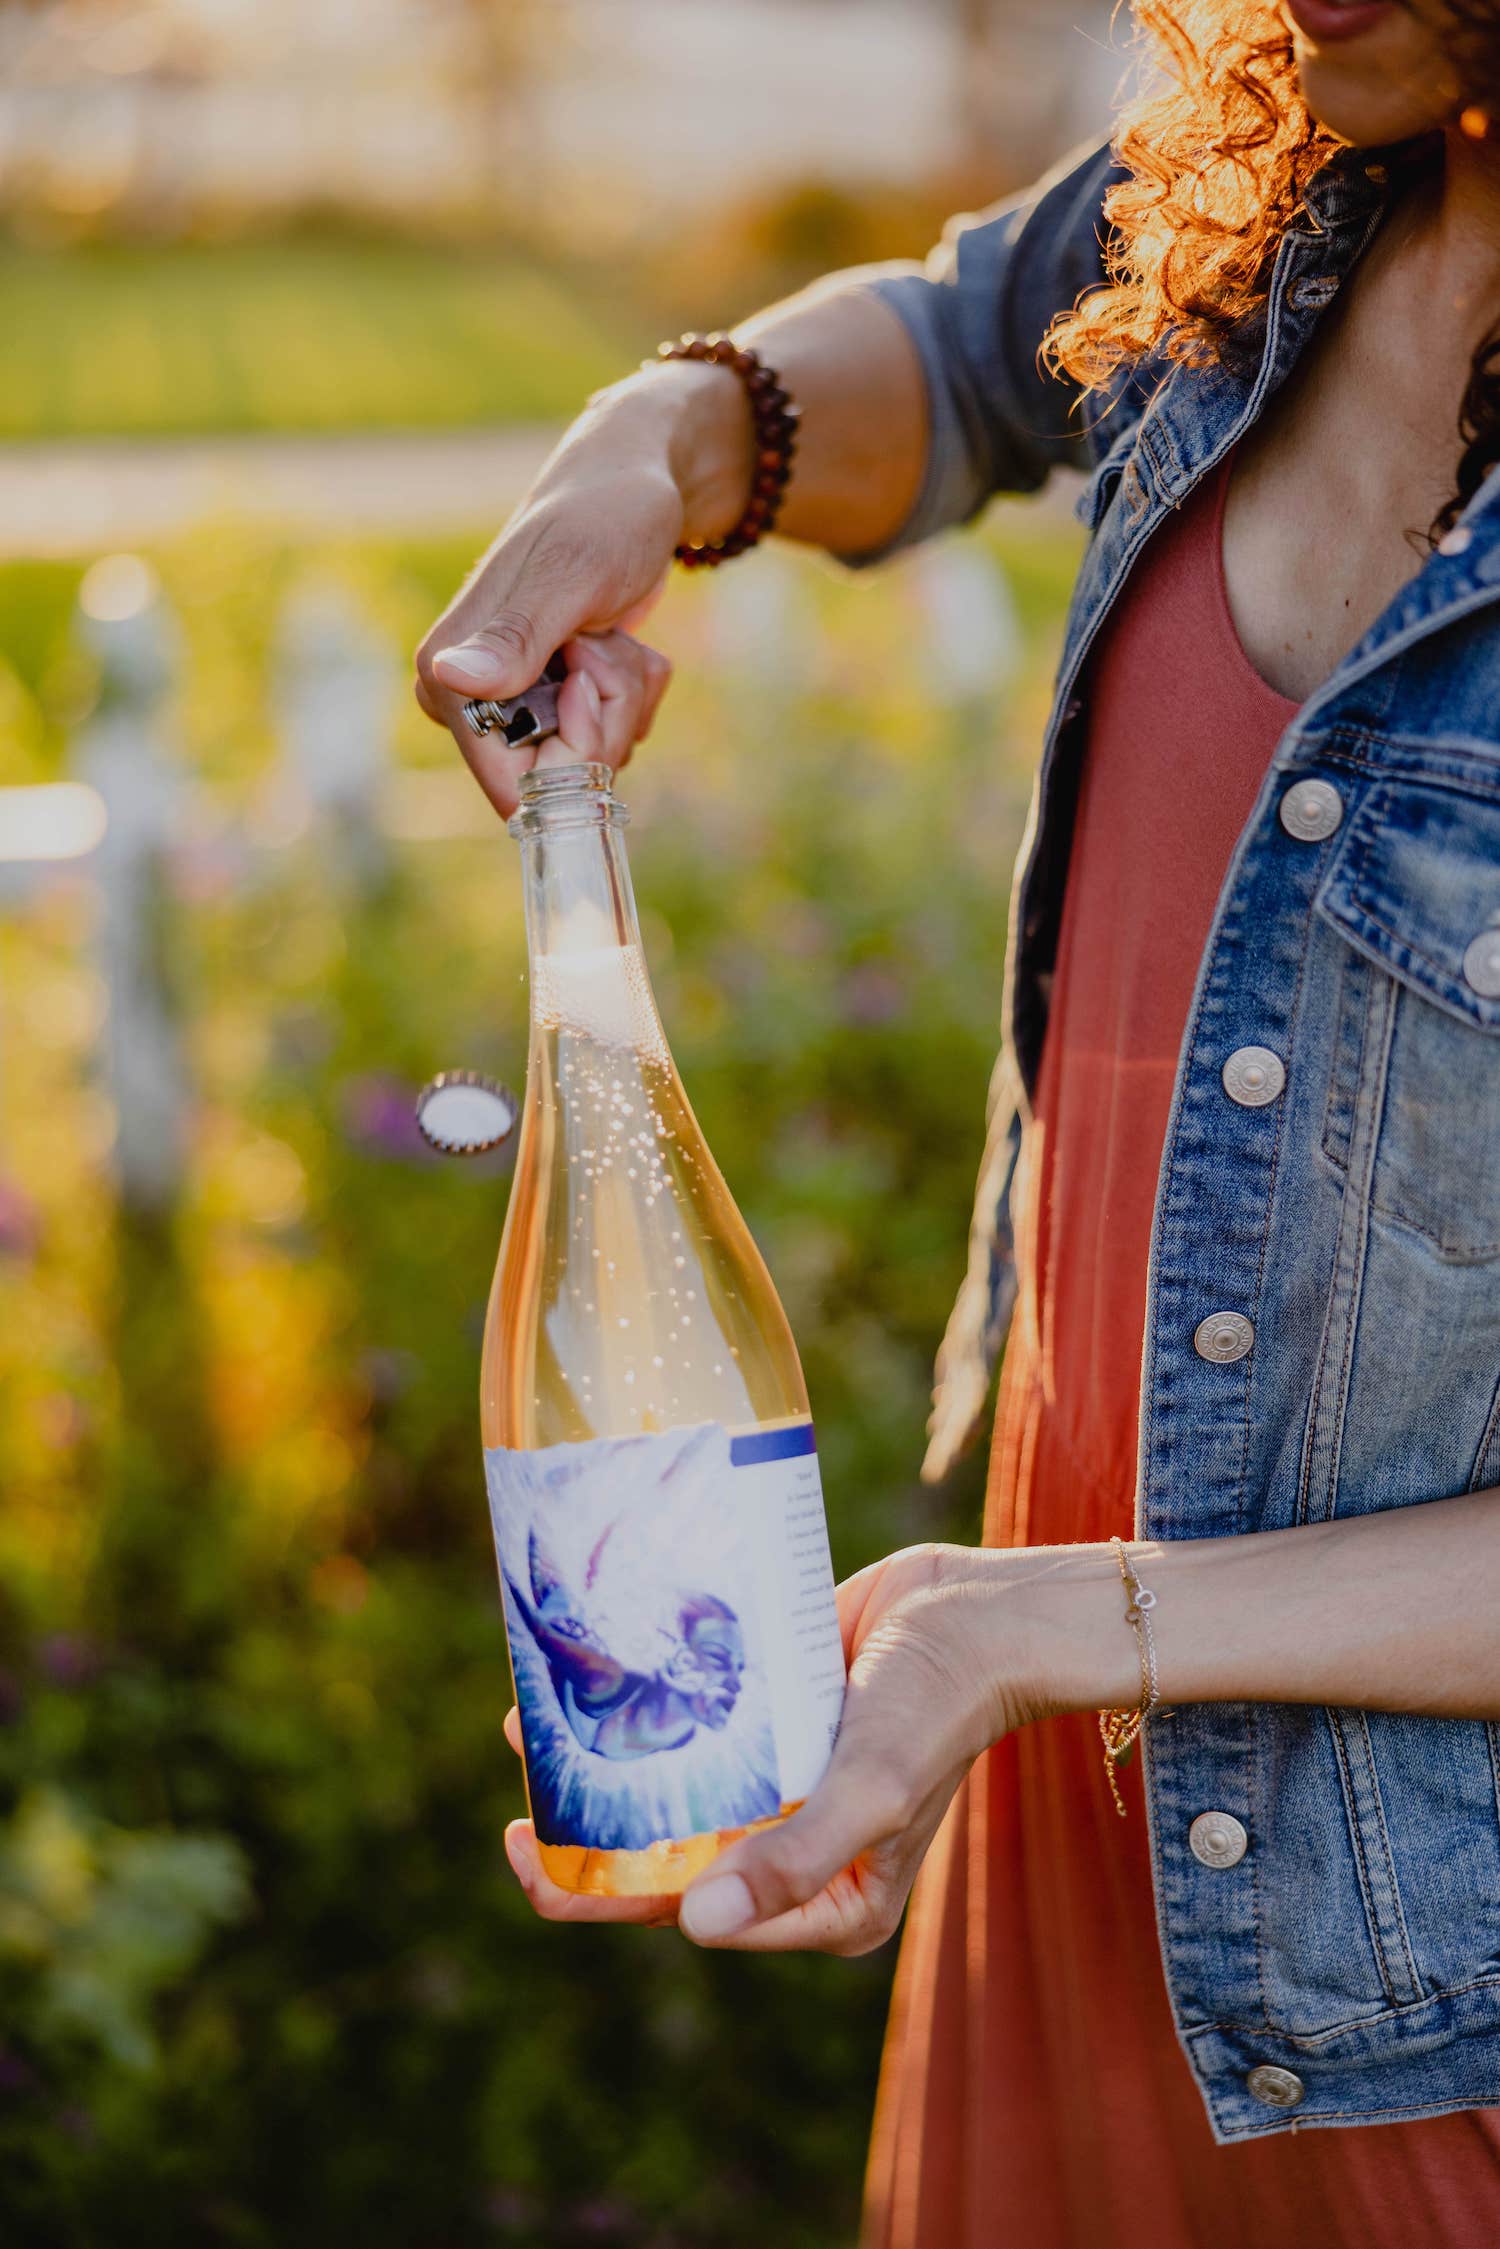 Person holding and opening a bottle of sparkling wine in a garden setting